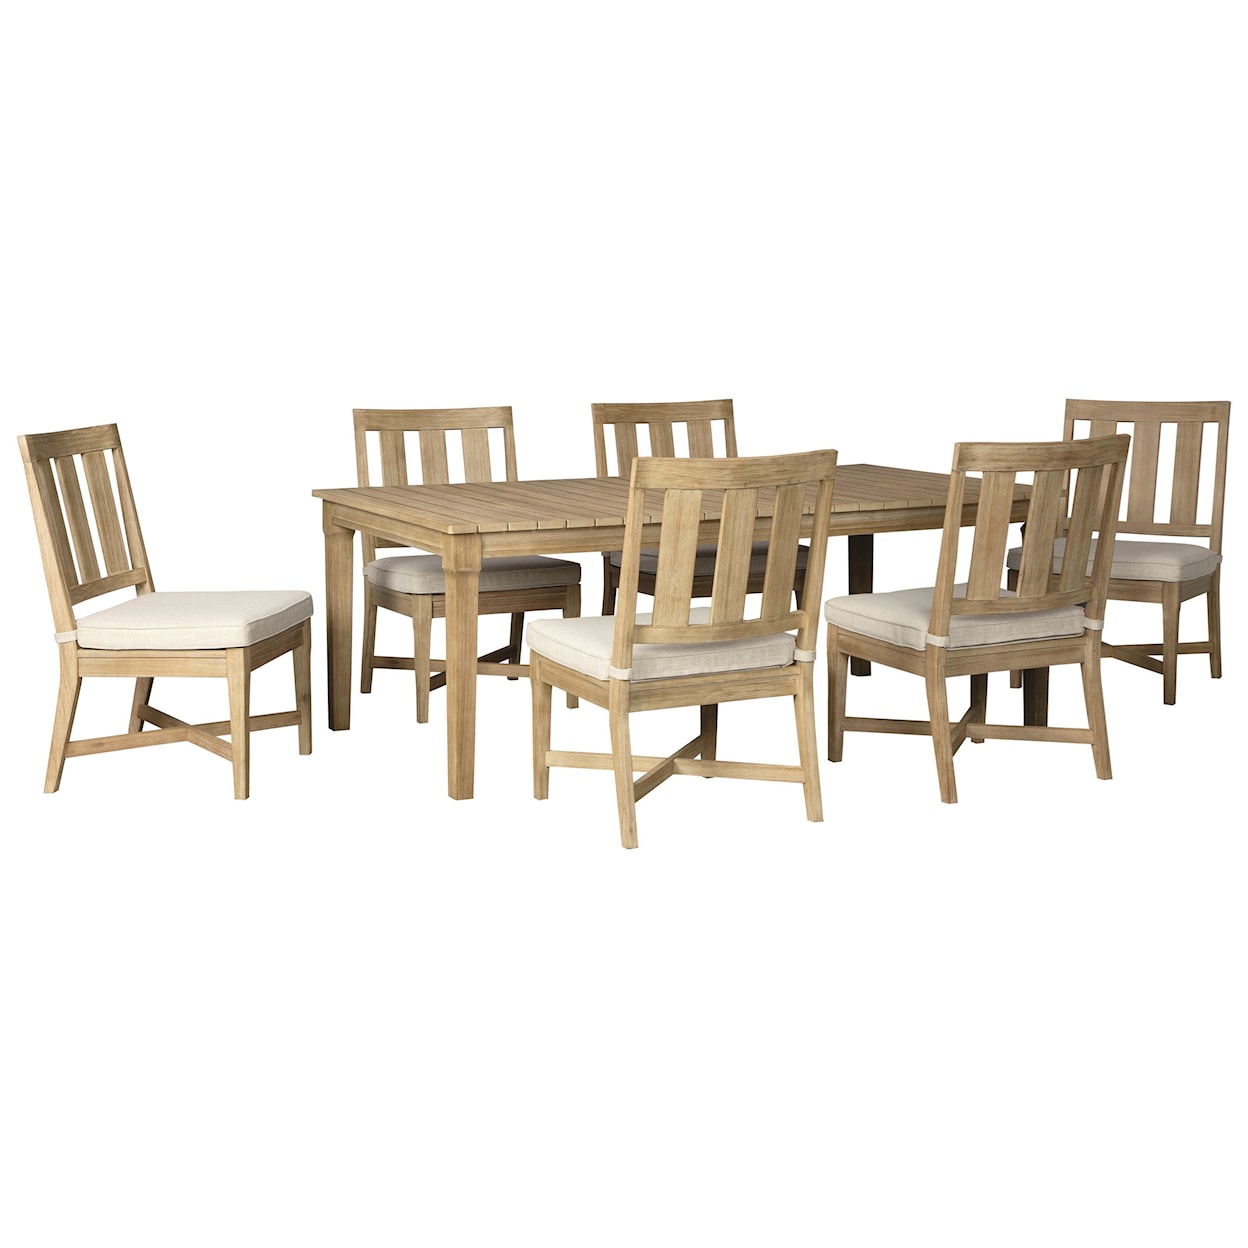 Signature Design by Ashley Clare View 7 Piece Outdoor Dining Set